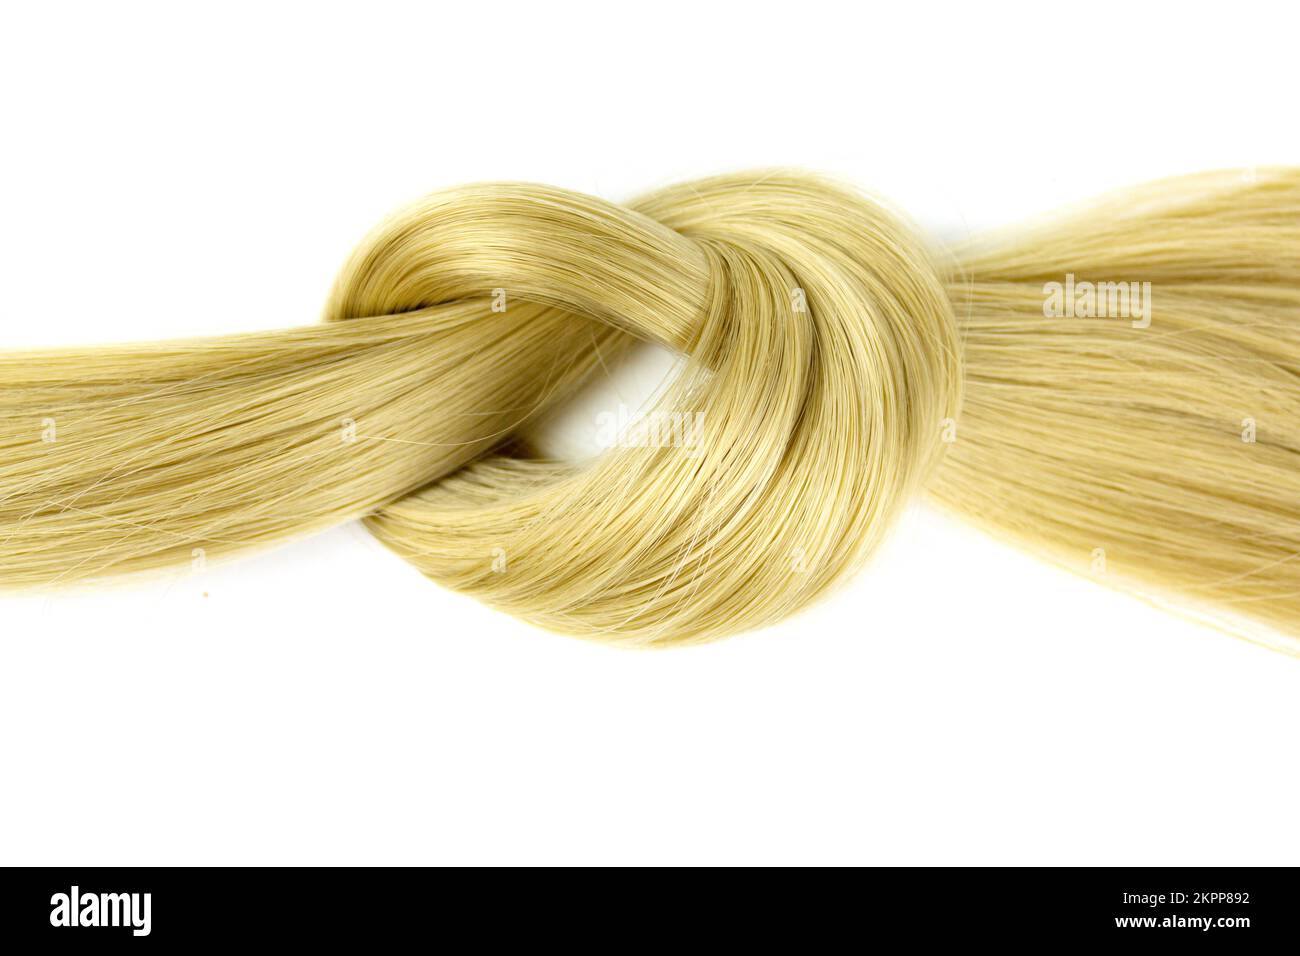 Blonde hair lock tied in knot. Lock of blonde wavy hair on white background, top view Stock Photo